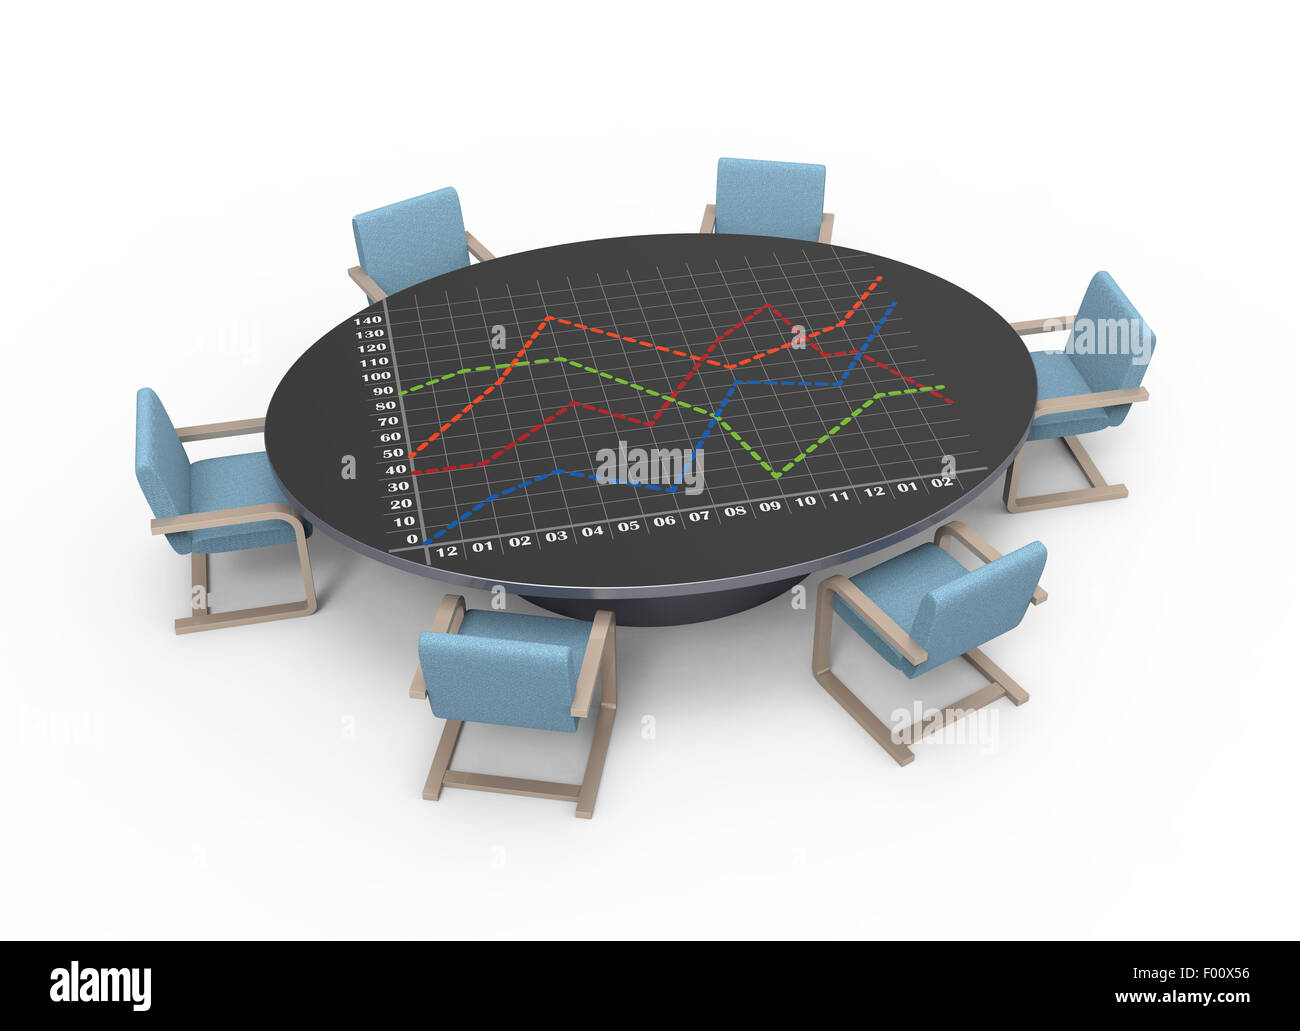 Oval table with strategic planning concept Stock Photo